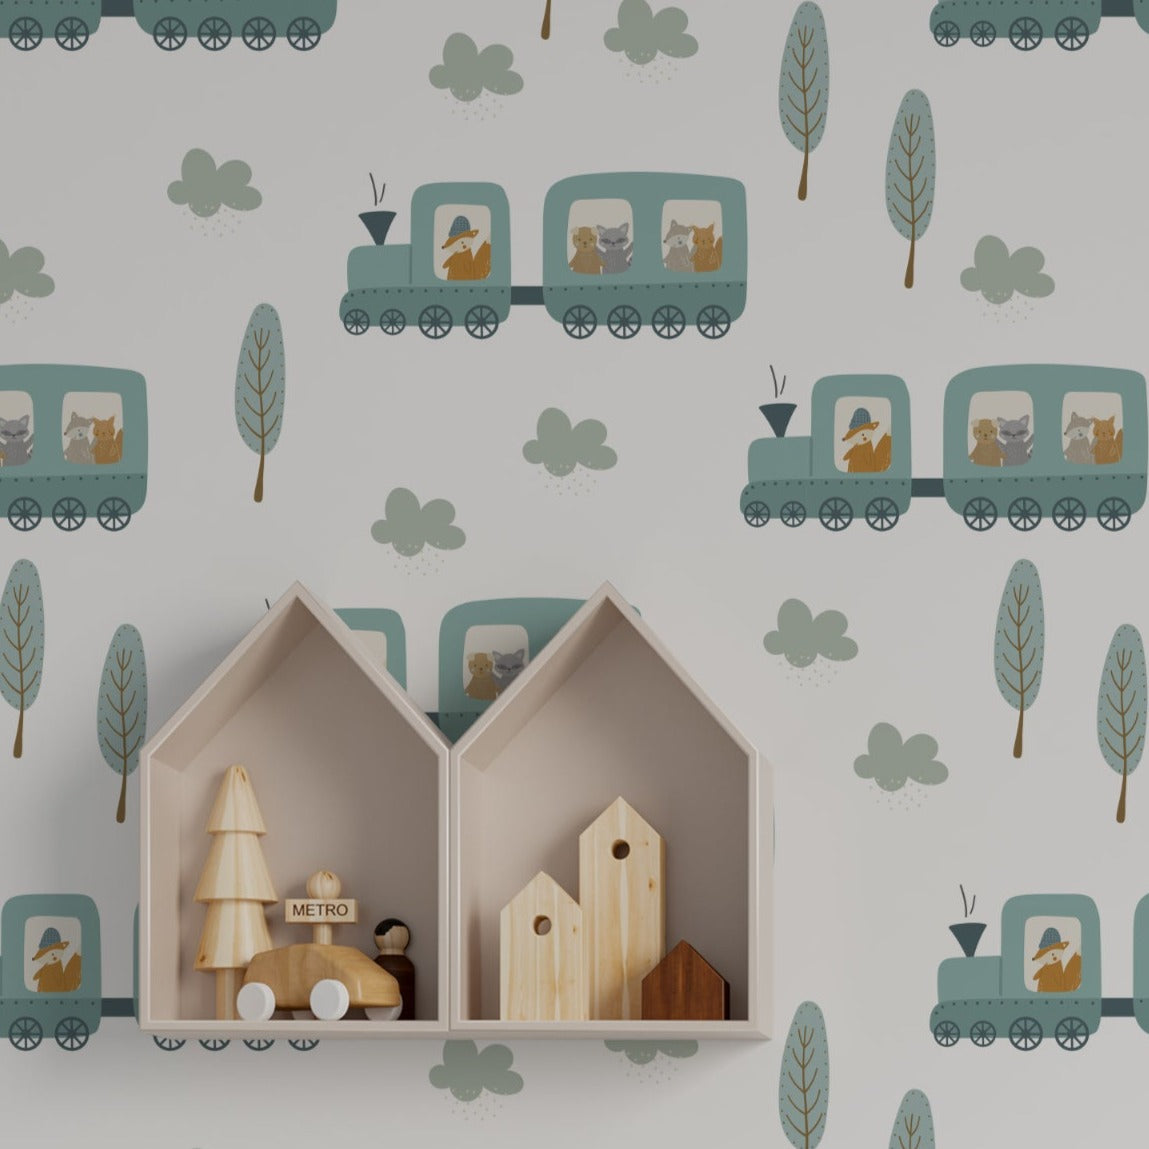 This image provides a detailed look at the All Aboard Wallpaper installed in a child's room. The wallpaper, with its delightful train and animal motifs set against a backdrop of trees and clouds, pairs beautifully with modern children's furniture and natural wooden toys, enhancing the playful and inviting atmosphere of the space.